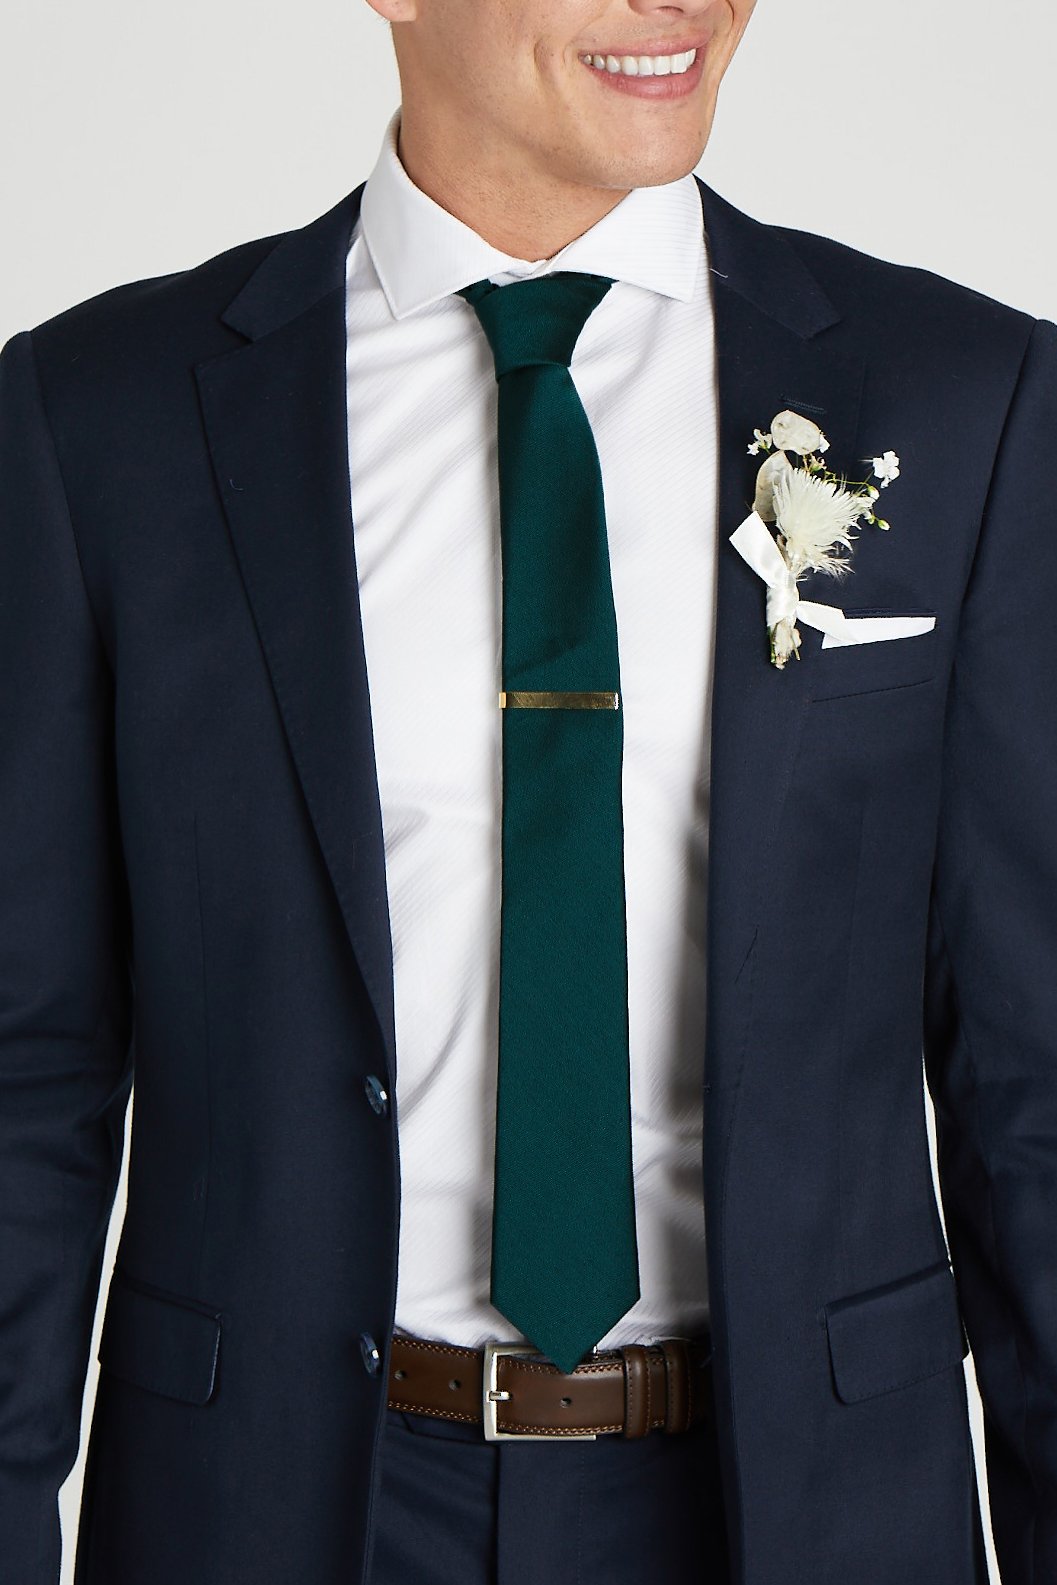 Front closeup view of the model wearing the Simon Necktie in emerald with a white button down collared shirt and navy blue suit. The tie is kept in place with a narrow rectangular tie clasp in matte gold.